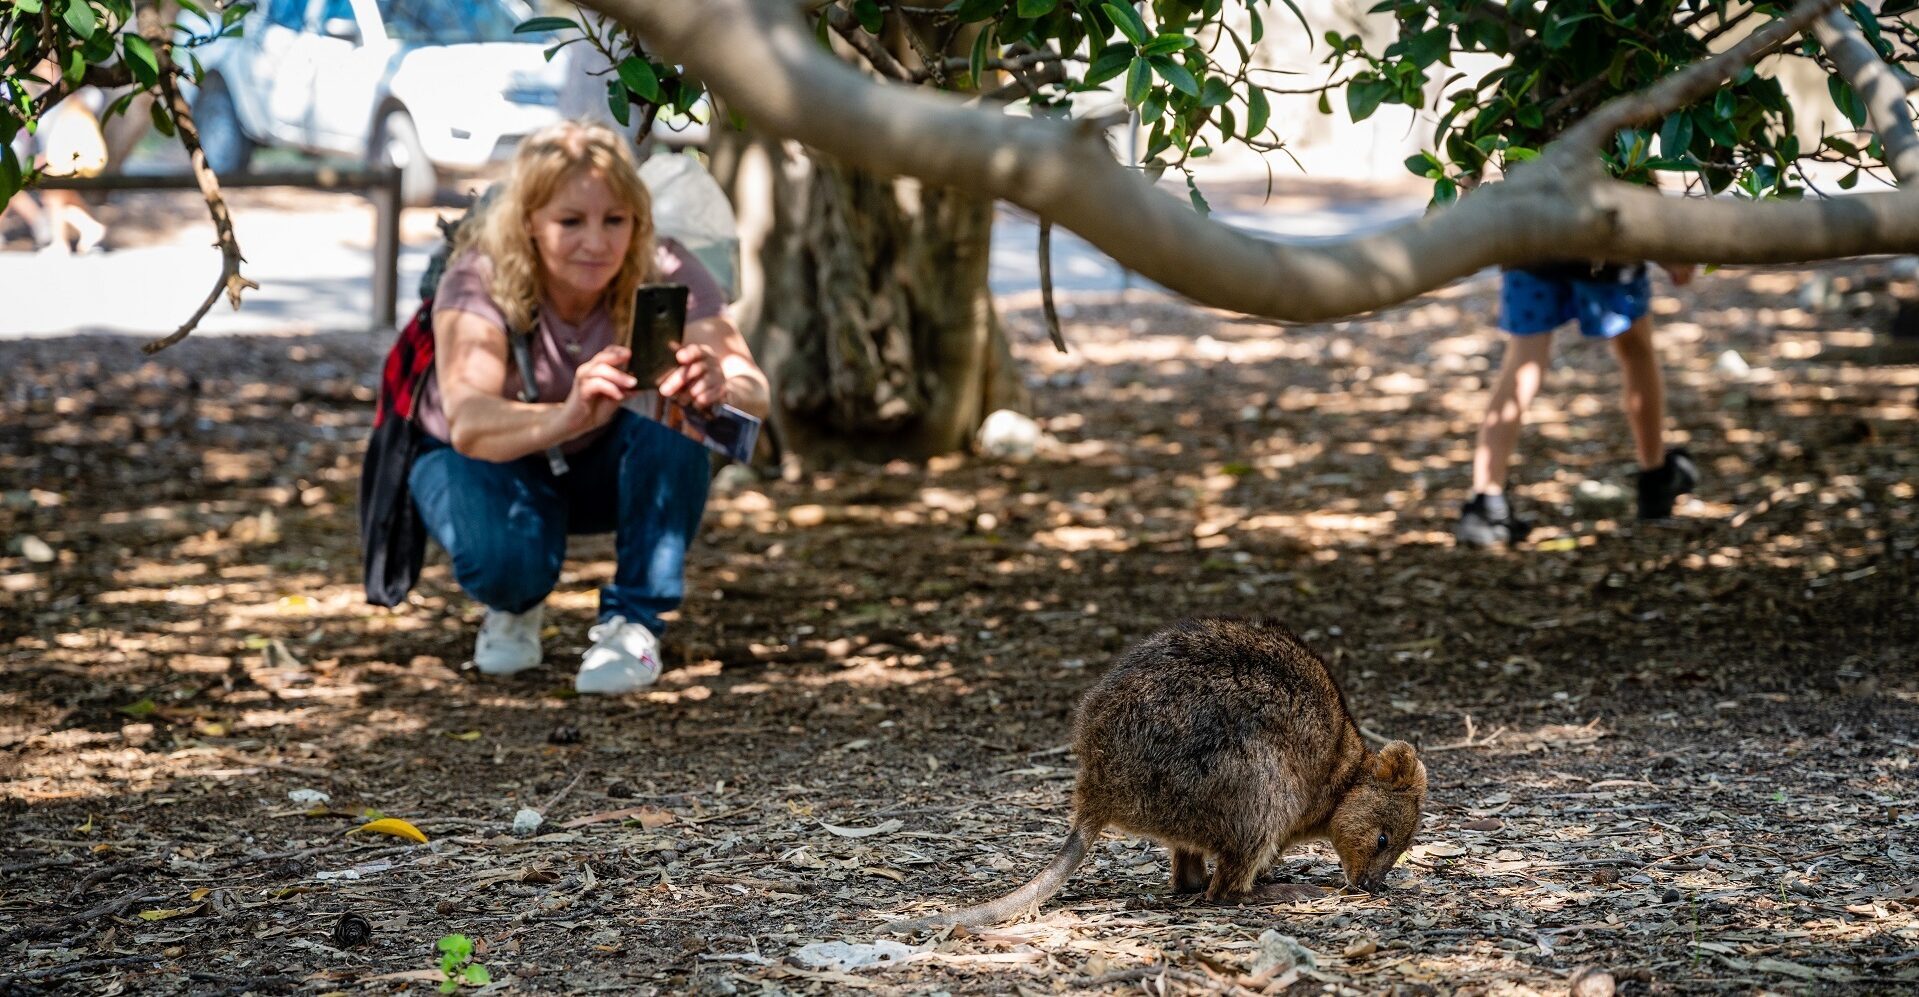 Woman taking a photo of a quokka